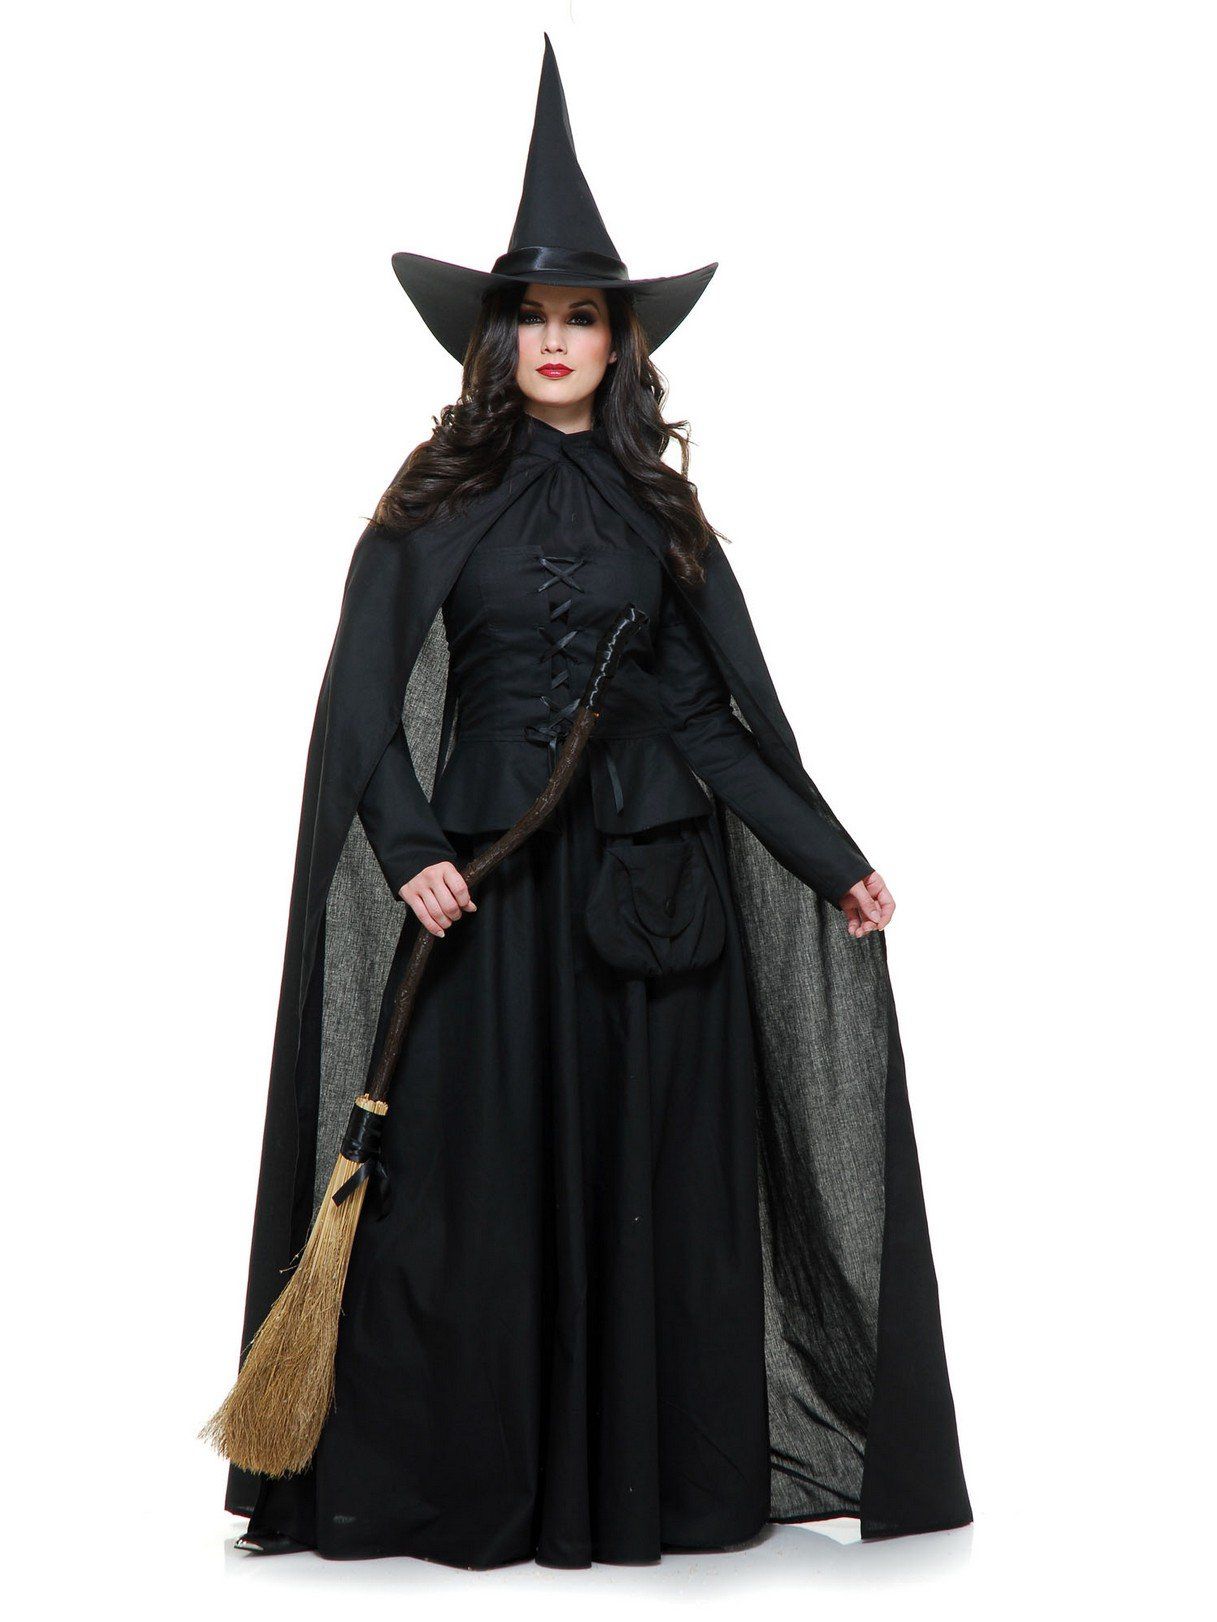 Women's Cloaked Wicked Witch Costume - costumes.com